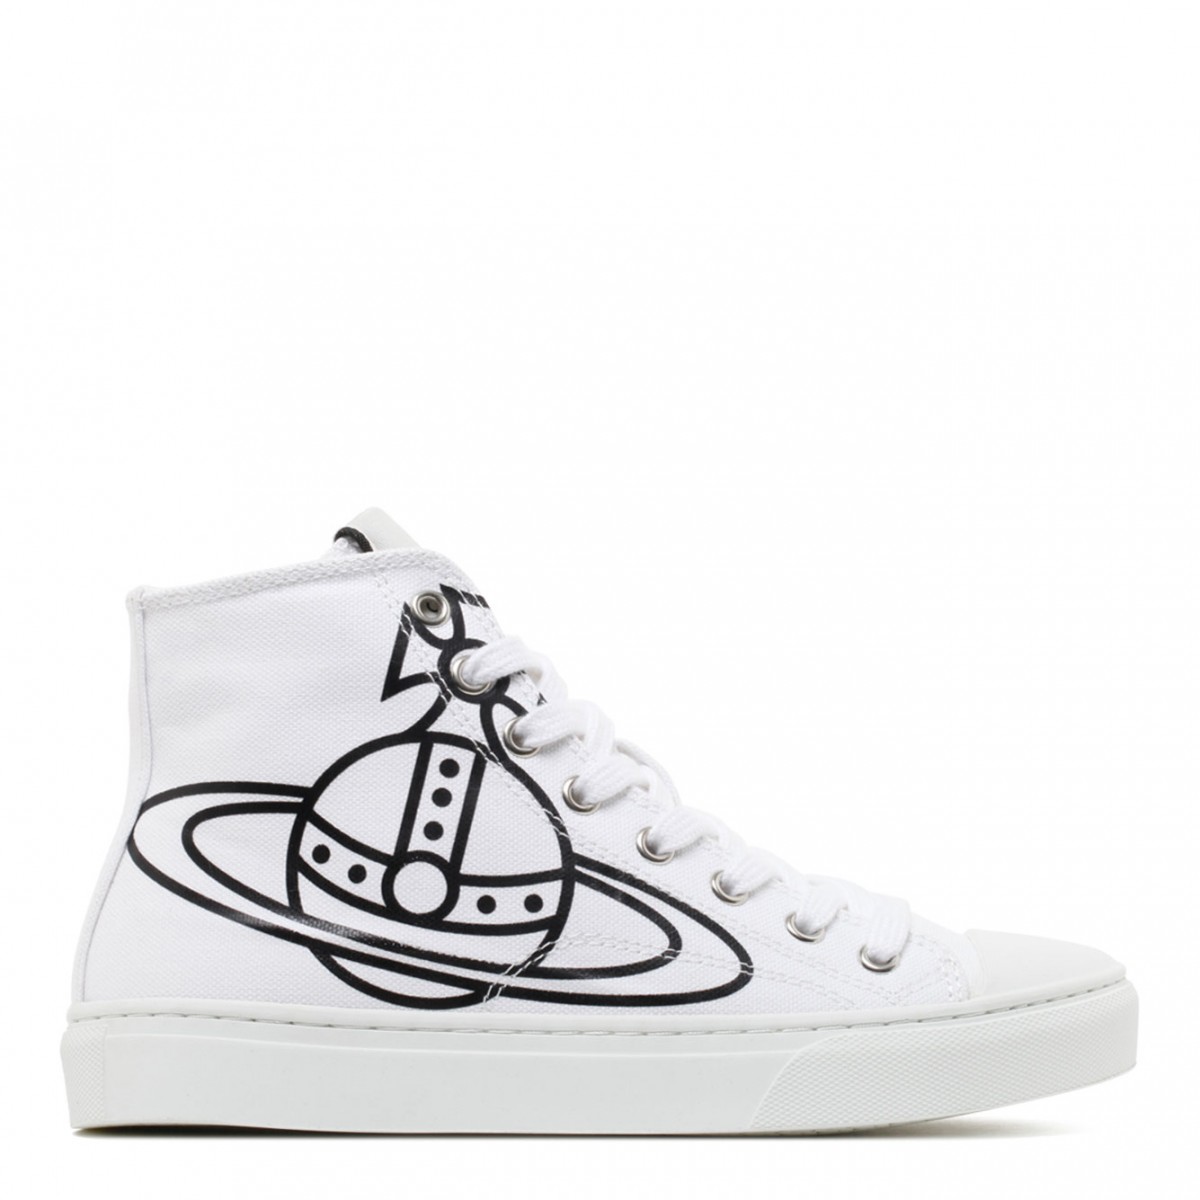 White and Black Plimsoll High Top Sneakers